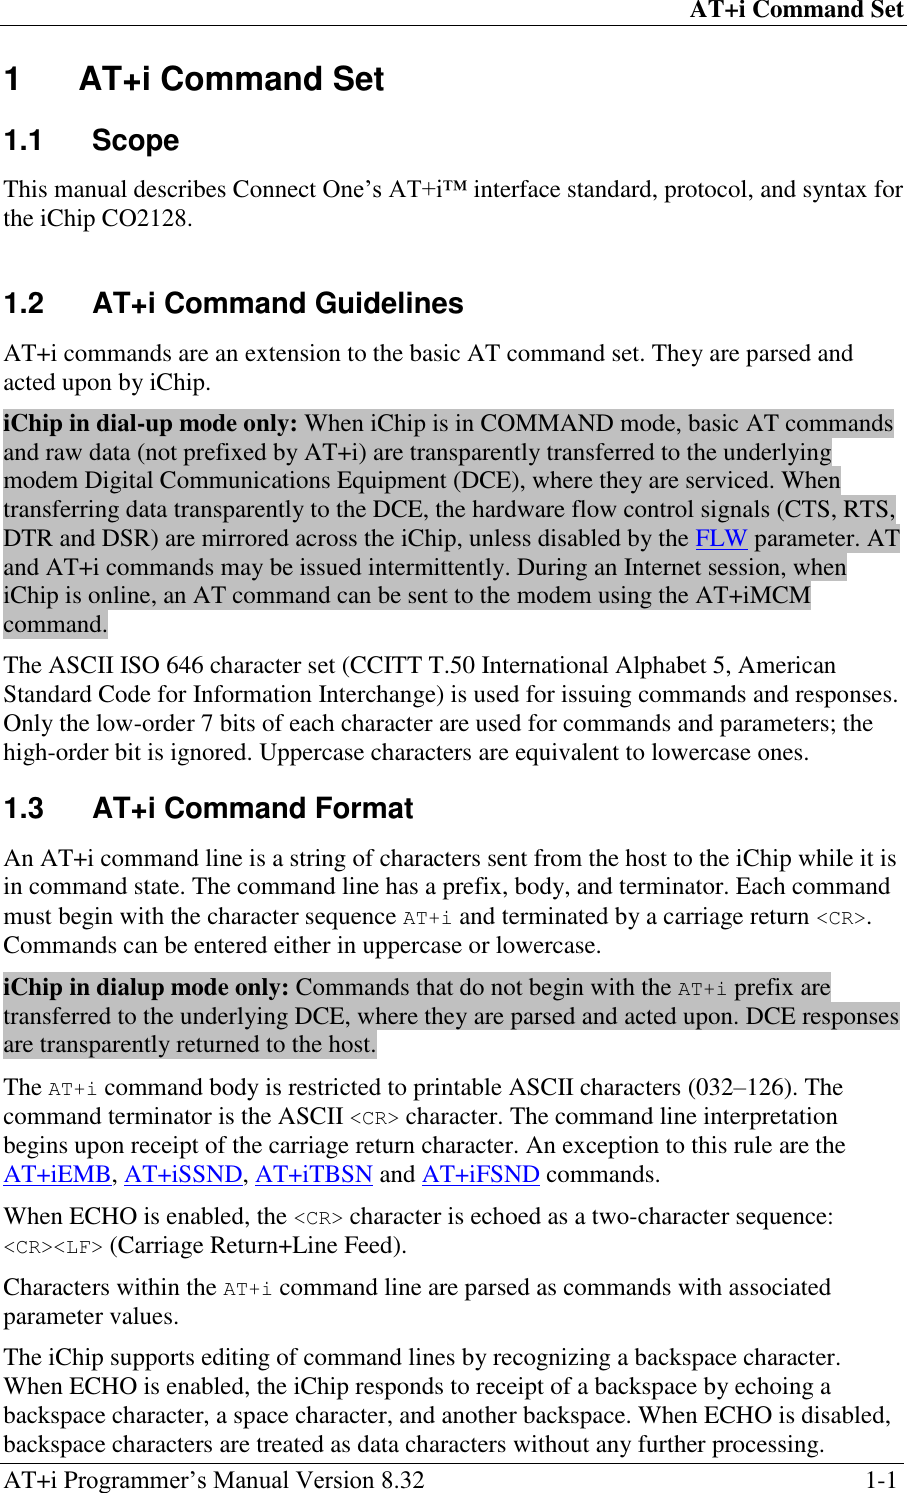 AT+i Command Set AT+i Programmer‘s Manual Version 8.32  1-1 1  AT+i Command Set 1.1  Scope This manual describes Connect One‘s AT+i™ interface standard, protocol, and syntax for the iChip CO2128.  1.2  AT+i Command Guidelines AT+i commands are an extension to the basic AT command set. They are parsed and acted upon by iChip. iChip in dial-up mode only: When iChip is in COMMAND mode, basic AT commands and raw data (not prefixed by AT+i) are transparently transferred to the underlying modem Digital Communications Equipment (DCE), where they are serviced. When transferring data transparently to the DCE, the hardware flow control signals (CTS, RTS, DTR and DSR) are mirrored across the iChip, unless disabled by the FLW parameter. AT and AT+i commands may be issued intermittently. During an Internet session, when iChip is online, an AT command can be sent to the modem using the AT+iMCM command. The ASCII ISO 646 character set (CCITT T.50 International Alphabet 5, American Standard Code for Information Interchange) is used for issuing commands and responses. Only the low-order 7 bits of each character are used for commands and parameters; the high-order bit is ignored. Uppercase characters are equivalent to lowercase ones. 1.3  AT+i Command Format An AT+i command line is a string of characters sent from the host to the iChip while it is in command state. The command line has a prefix, body, and terminator. Each command must begin with the character sequence AT+i and terminated by a carriage return &lt;CR&gt;. Commands can be entered either in uppercase or lowercase. iChip in dialup mode only: Commands that do not begin with the AT+i prefix are transferred to the underlying DCE, where they are parsed and acted upon. DCE responses are transparently returned to the host. The AT+i command body is restricted to printable ASCII characters (032–126). The command terminator is the ASCII &lt;CR&gt; character. The command line interpretation begins upon receipt of the carriage return character. An exception to this rule are the AT+iEMB, AT+iSSND, AT+iTBSN and AT+iFSND commands. When ECHO is enabled, the &lt;CR&gt; character is echoed as a two-character sequence: &lt;CR&gt;&lt;LF&gt; (Carriage Return+Line Feed). Characters within the AT+i command line are parsed as commands with associated parameter values. The iChip supports editing of command lines by recognizing a backspace character. When ECHO is enabled, the iChip responds to receipt of a backspace by echoing a backspace character, a space character, and another backspace. When ECHO is disabled, backspace characters are treated as data characters without any further processing. 